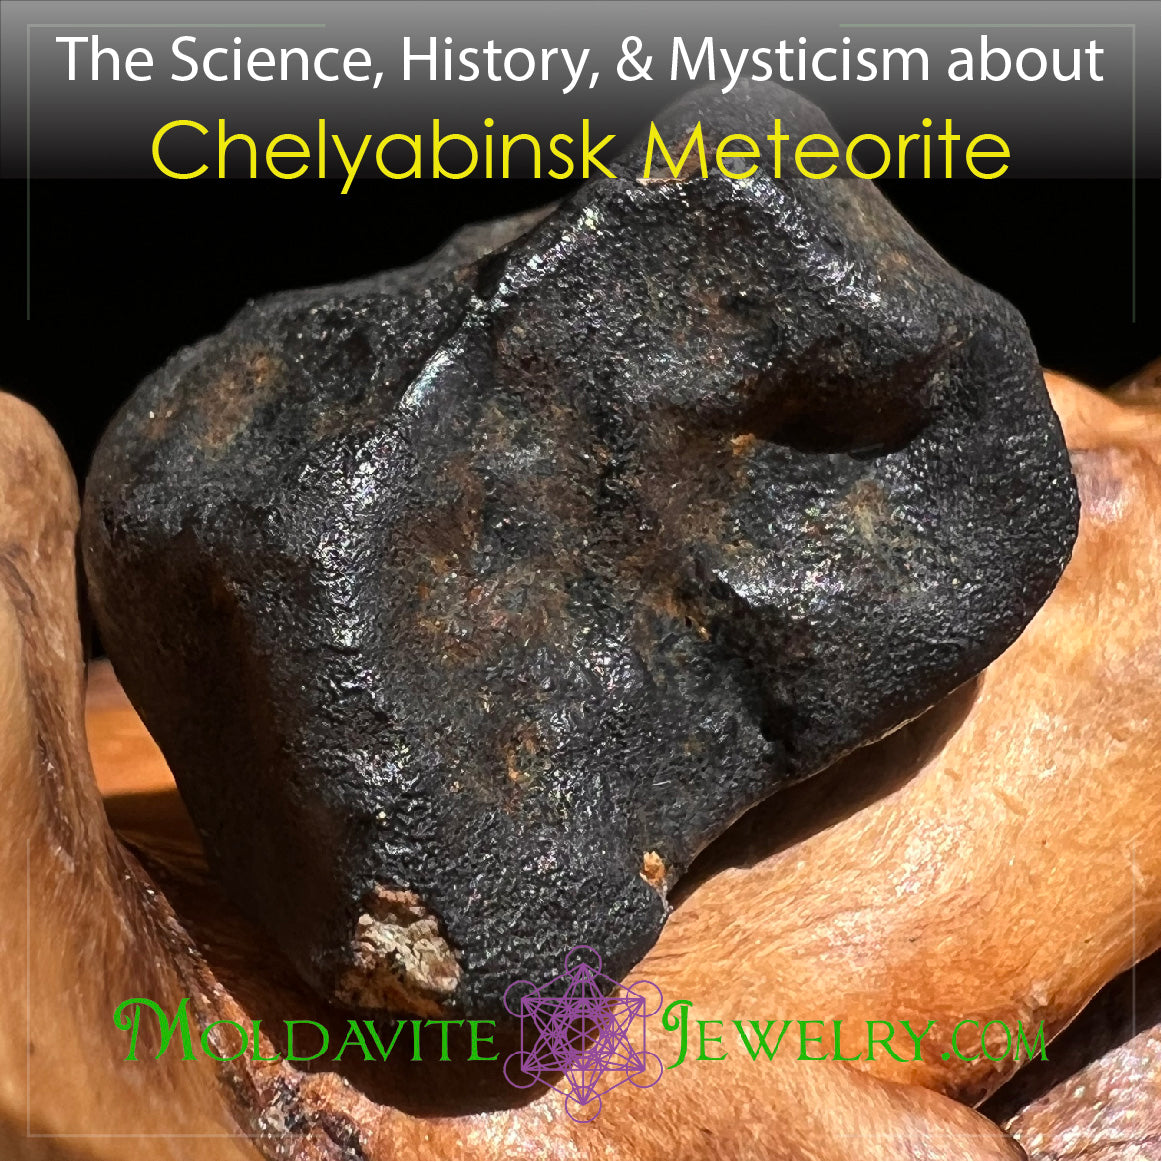 The Science, History, & Mysticism about Chelyabinsk Meteorite